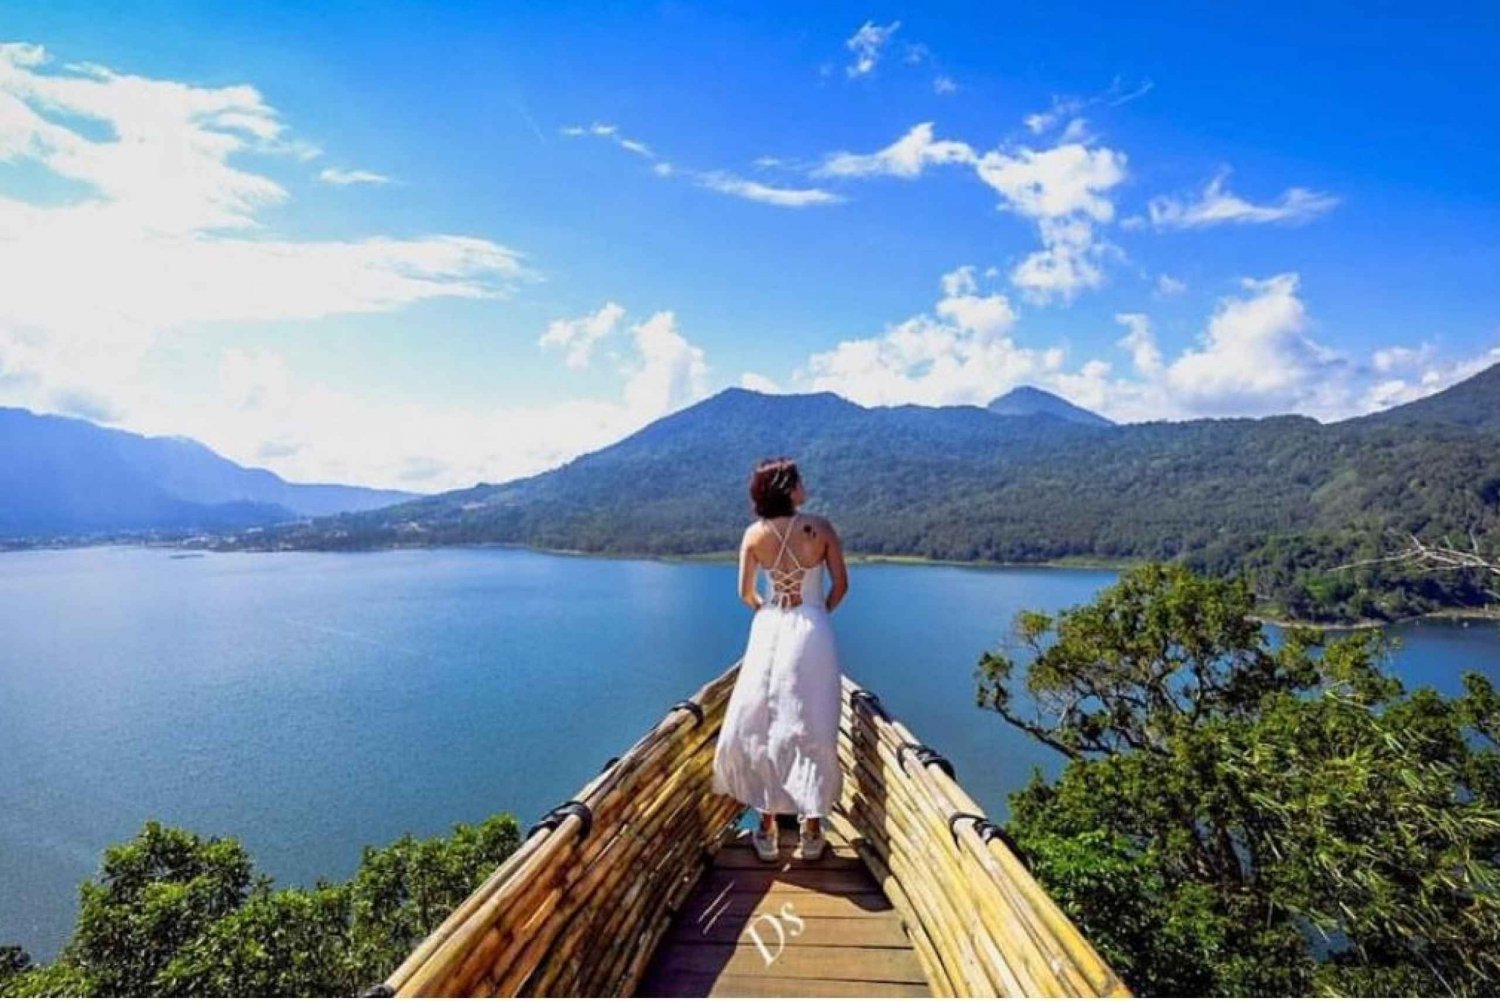 North Bali: Full-day Highlights Instagram Tour